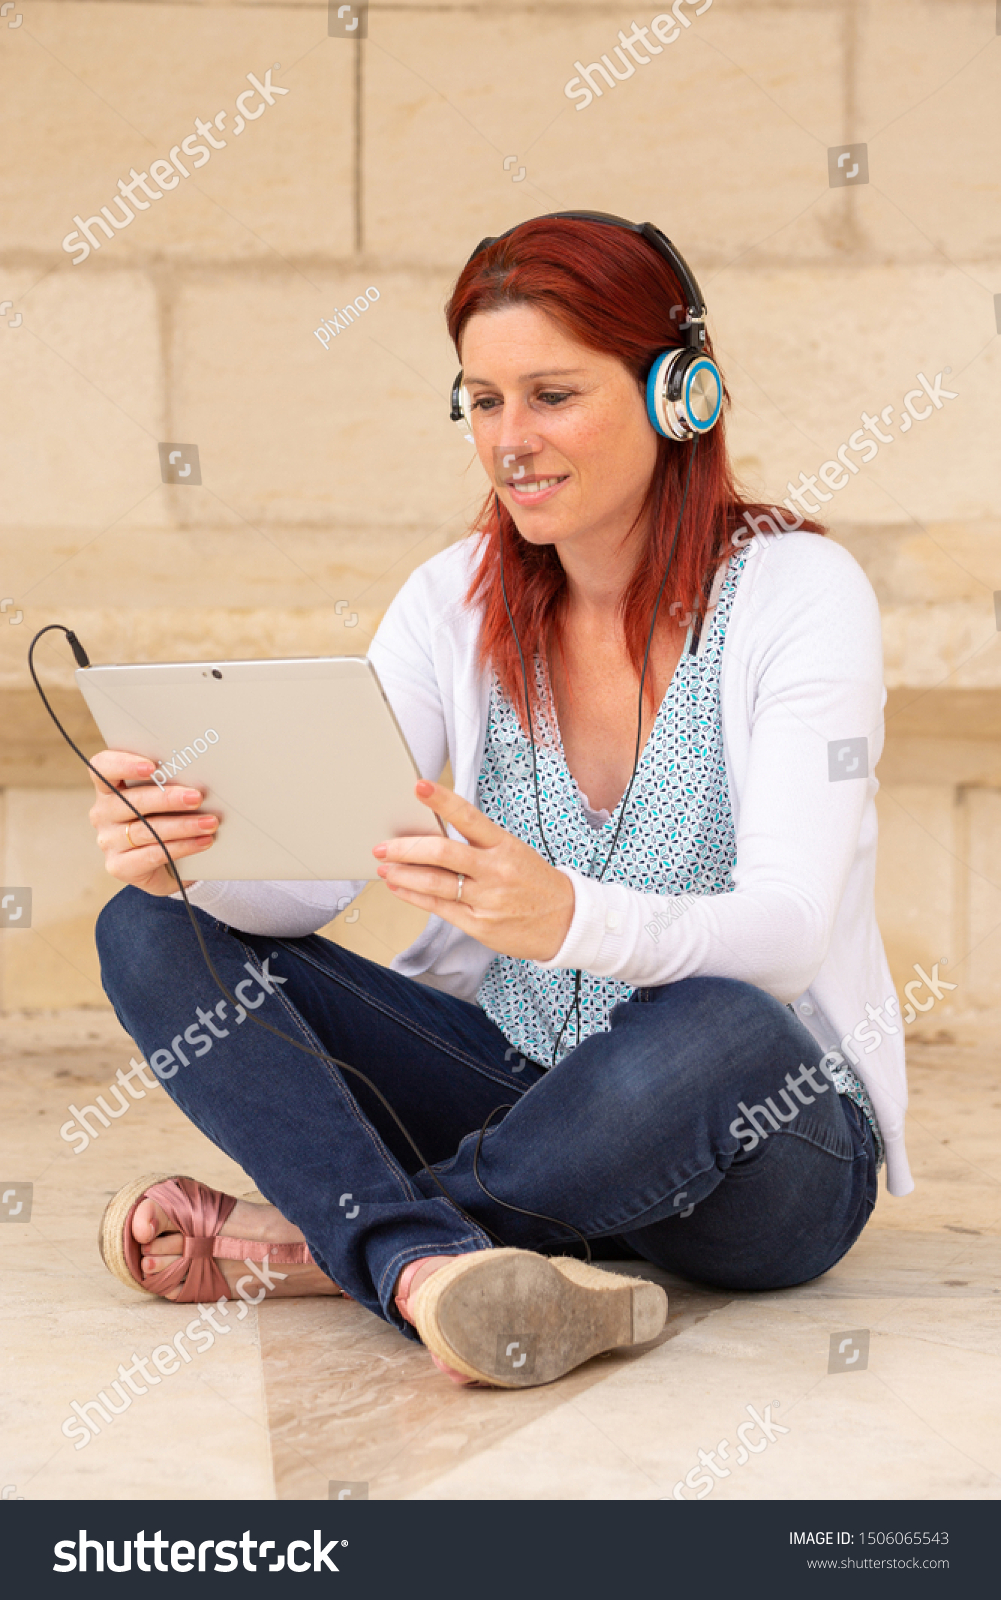 Pretty smiling redhead woman sitting on the floor listening to music or watching a movie on a touch pad #1506065543